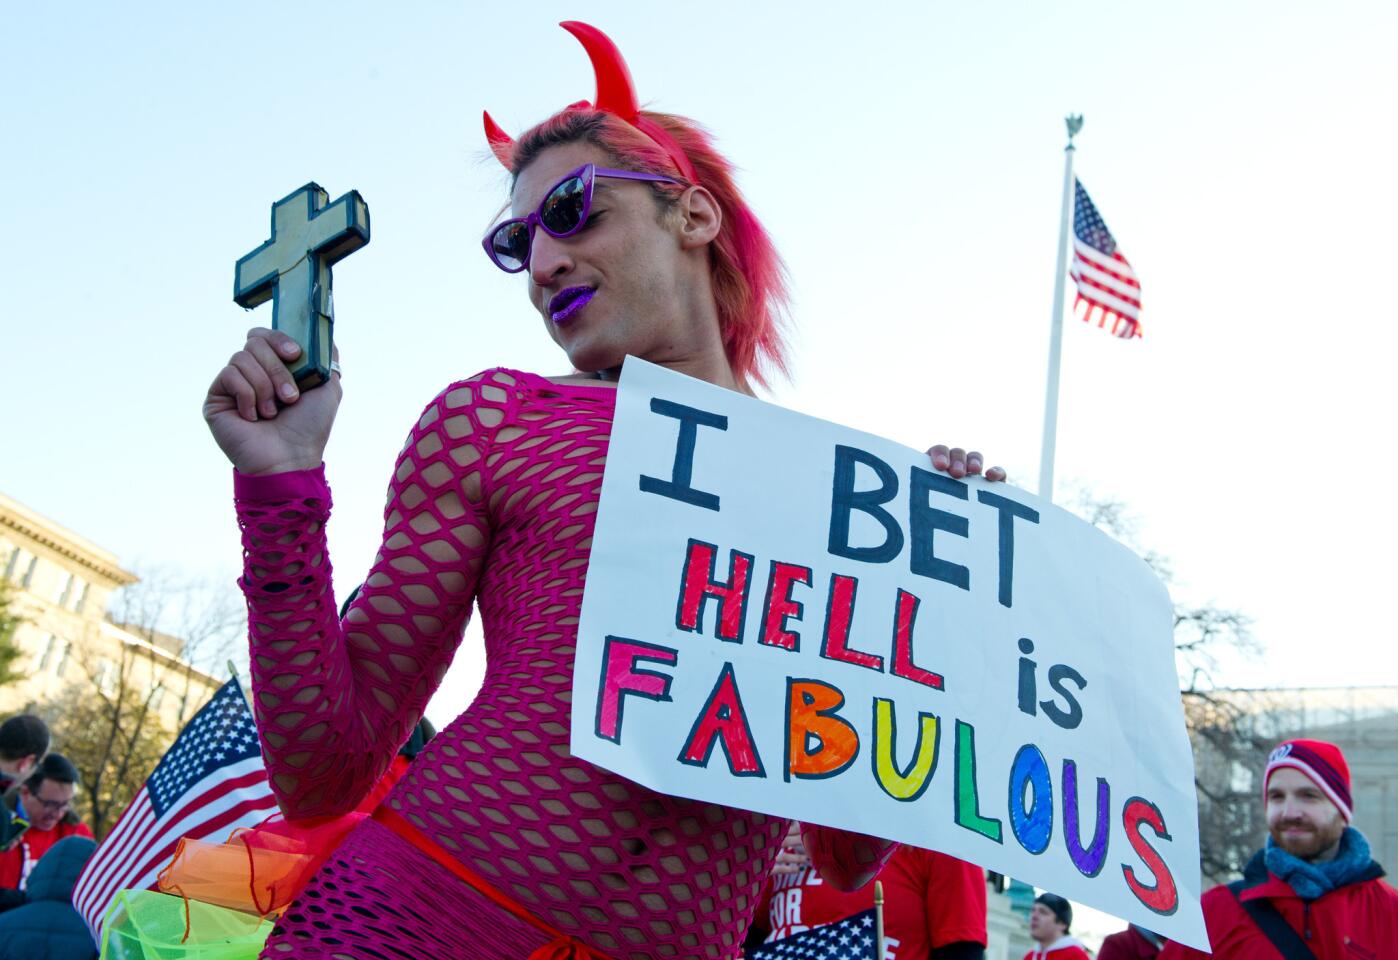 I bet hell is fabulous